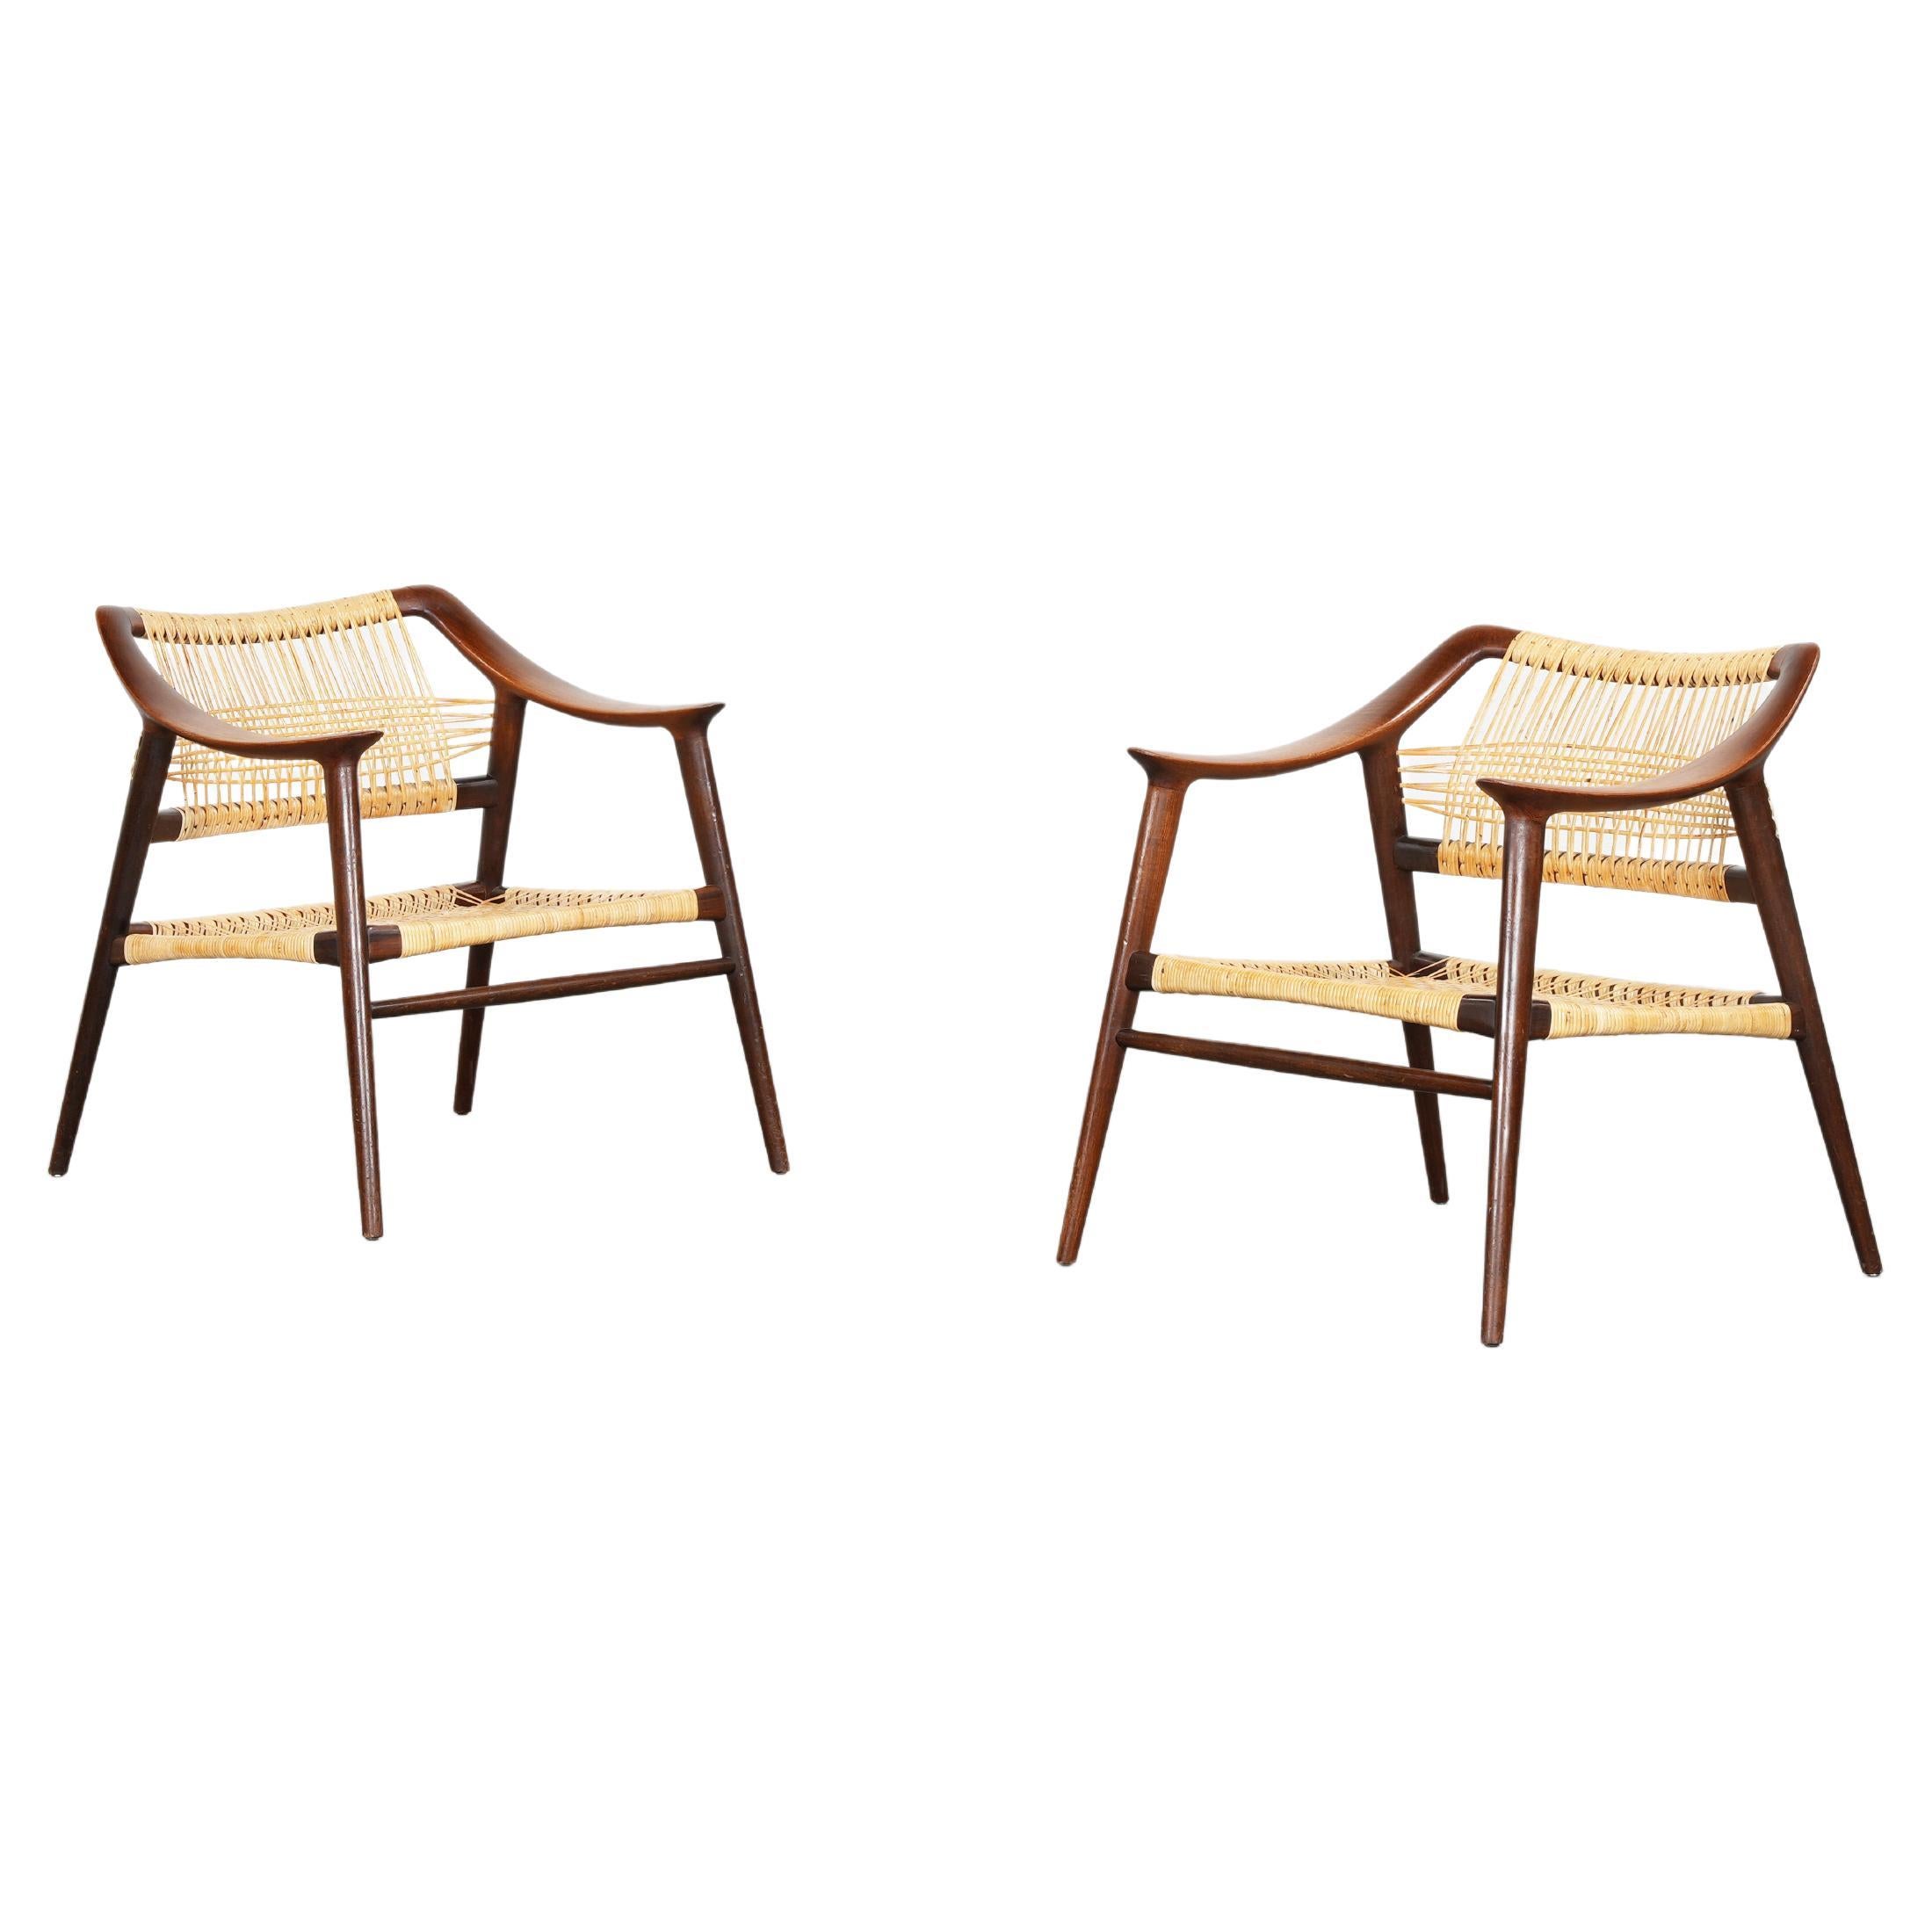 Rare Pair of Lounge Easy Chairs by Rastad & Relling Mod. Bambi, Norway For Sale